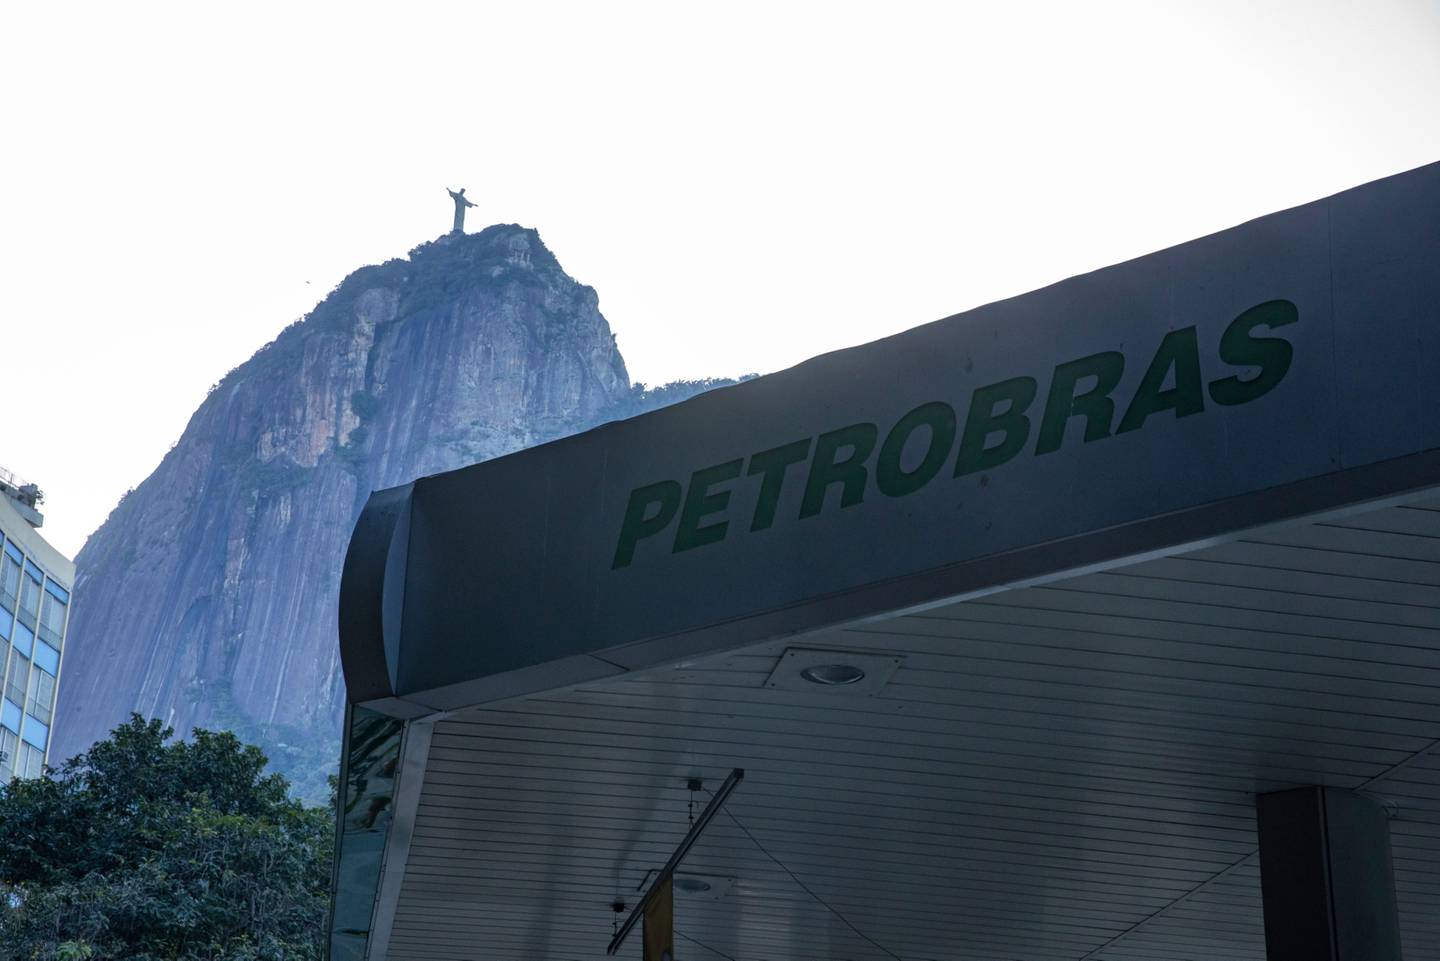 Petrobras has been under heavy political pressure to reduce fuel costs to help bring down annual inflation running near 12%.